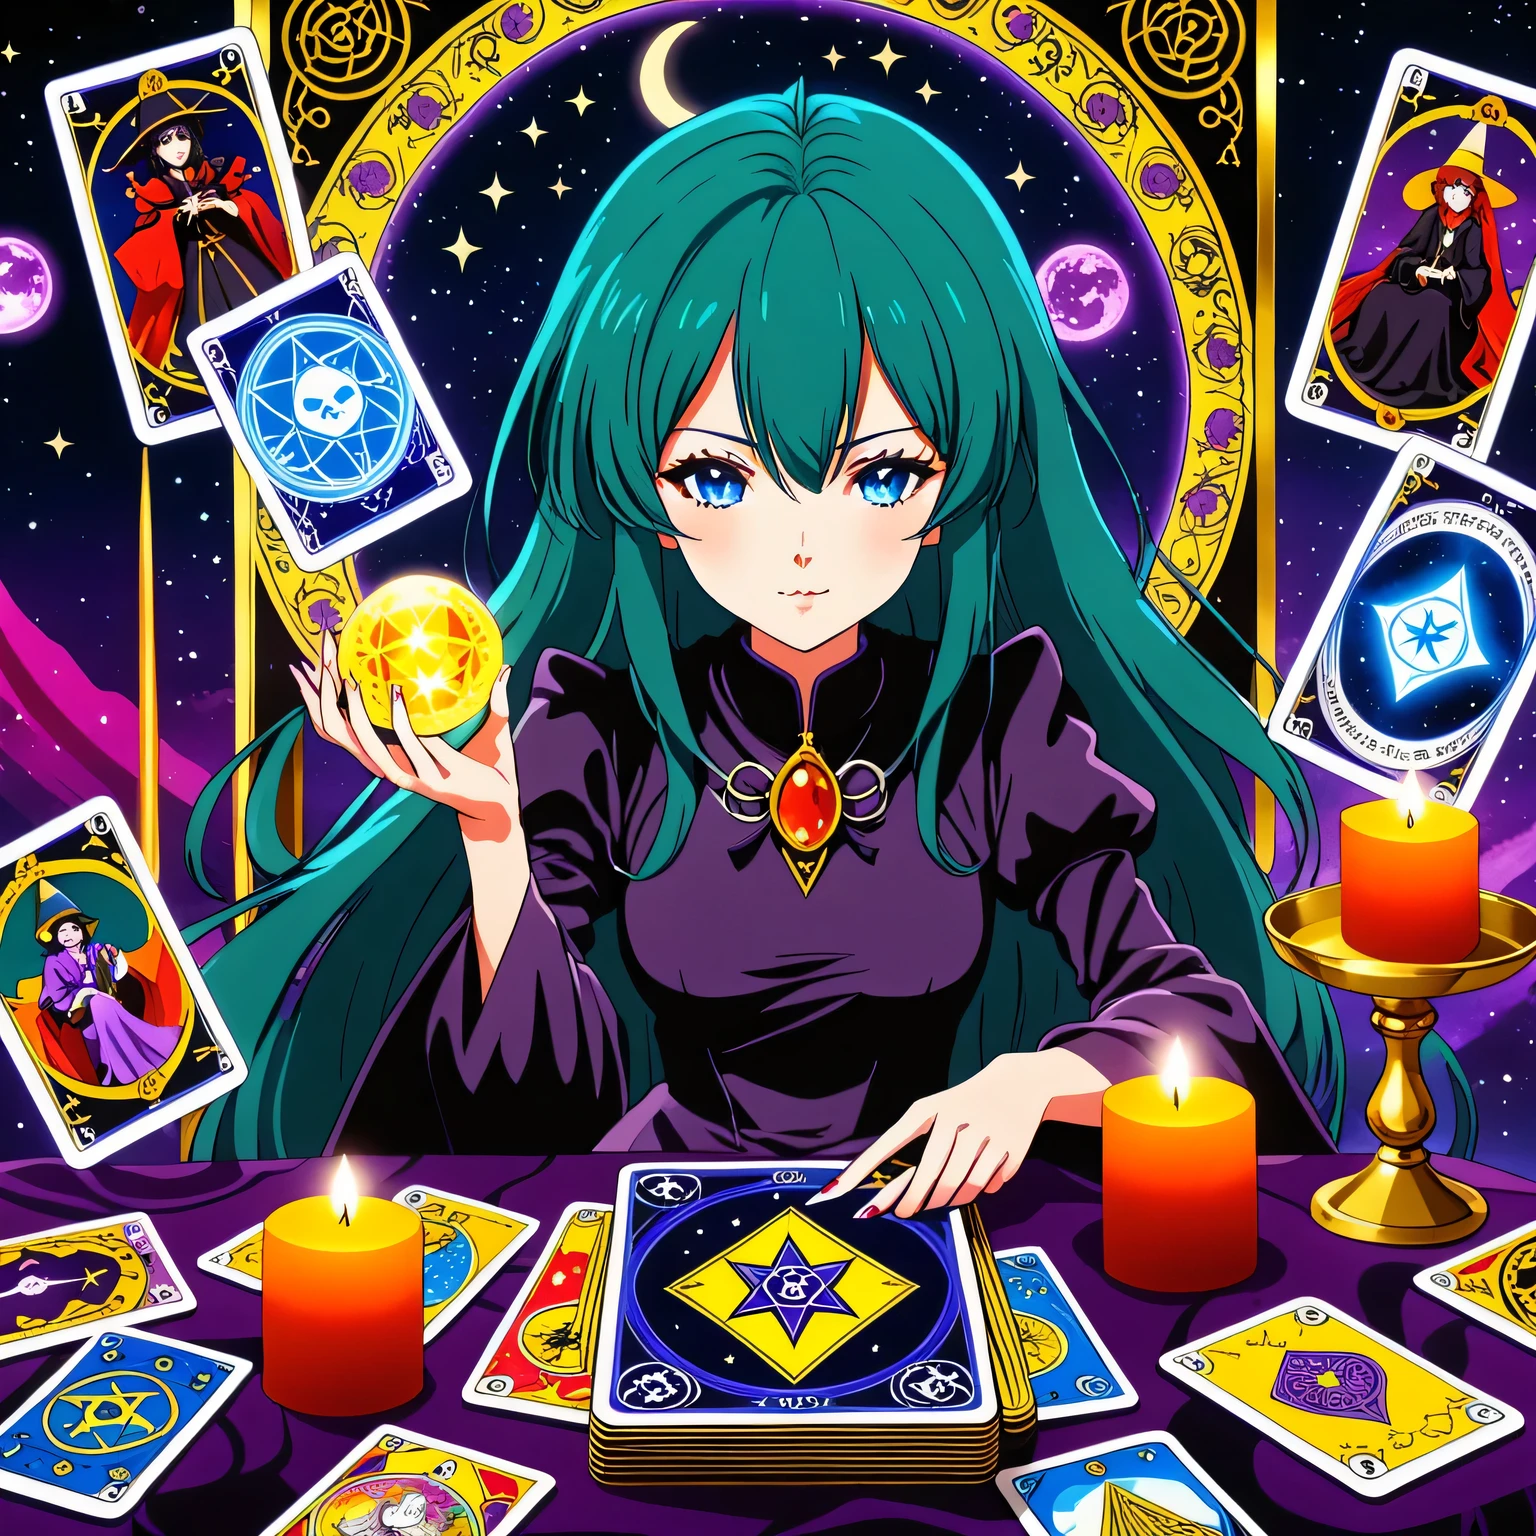 A frame from the anime about the witch and Tarot Cards, bright and colorful, modern anime, fortune telling on Tarot Cards, Tarot Cards Anime